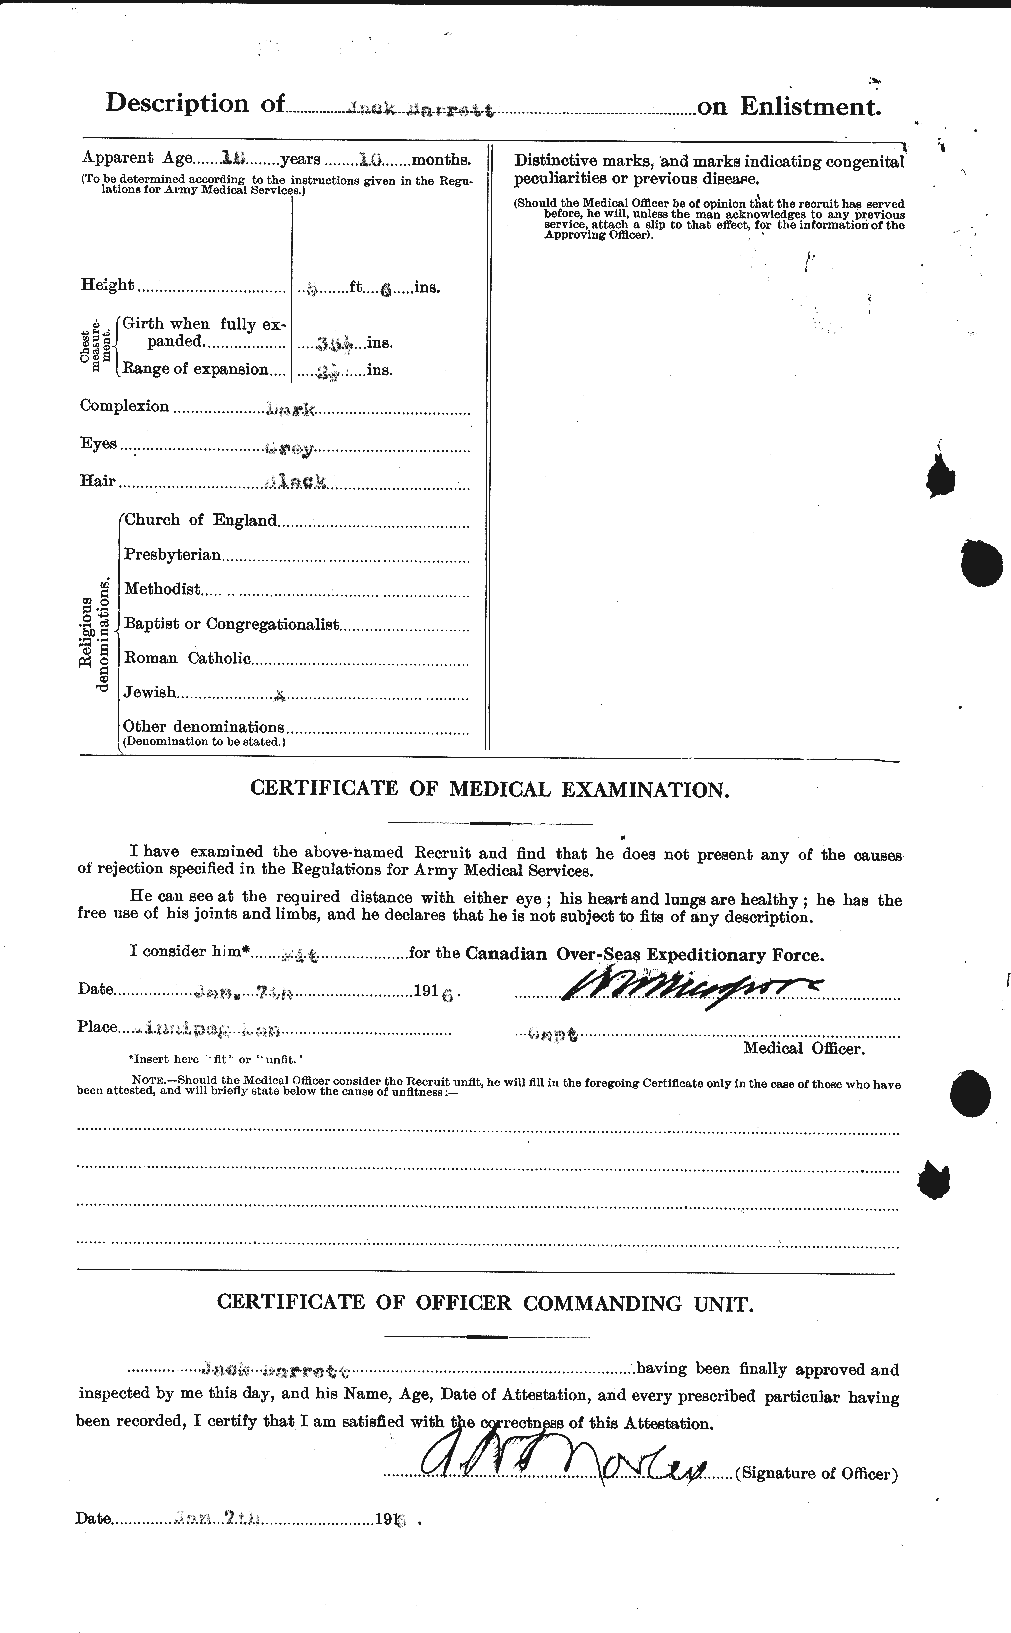 Personnel Records of the First World War - CEF 220268b